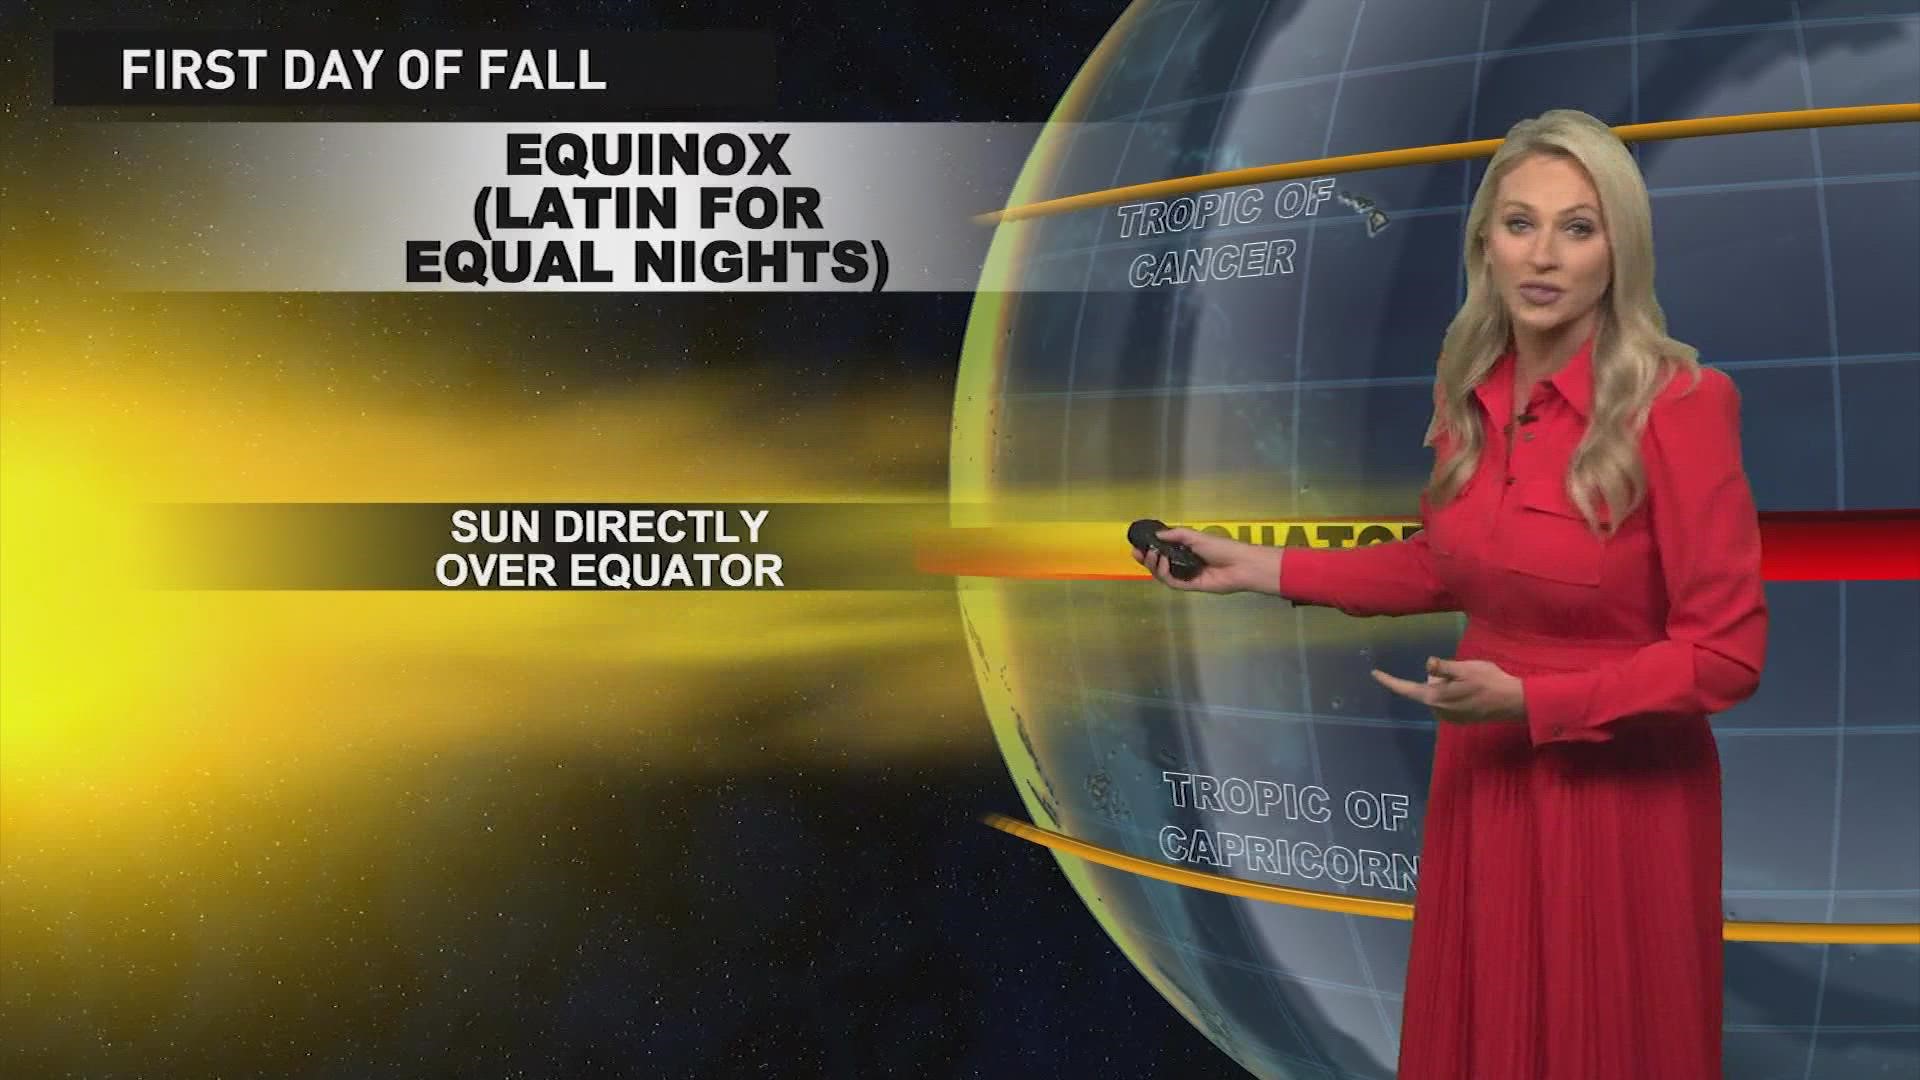 Say goodbye to summer and extreme heat, says KHOU 11 Meteorologist Chita Craft!